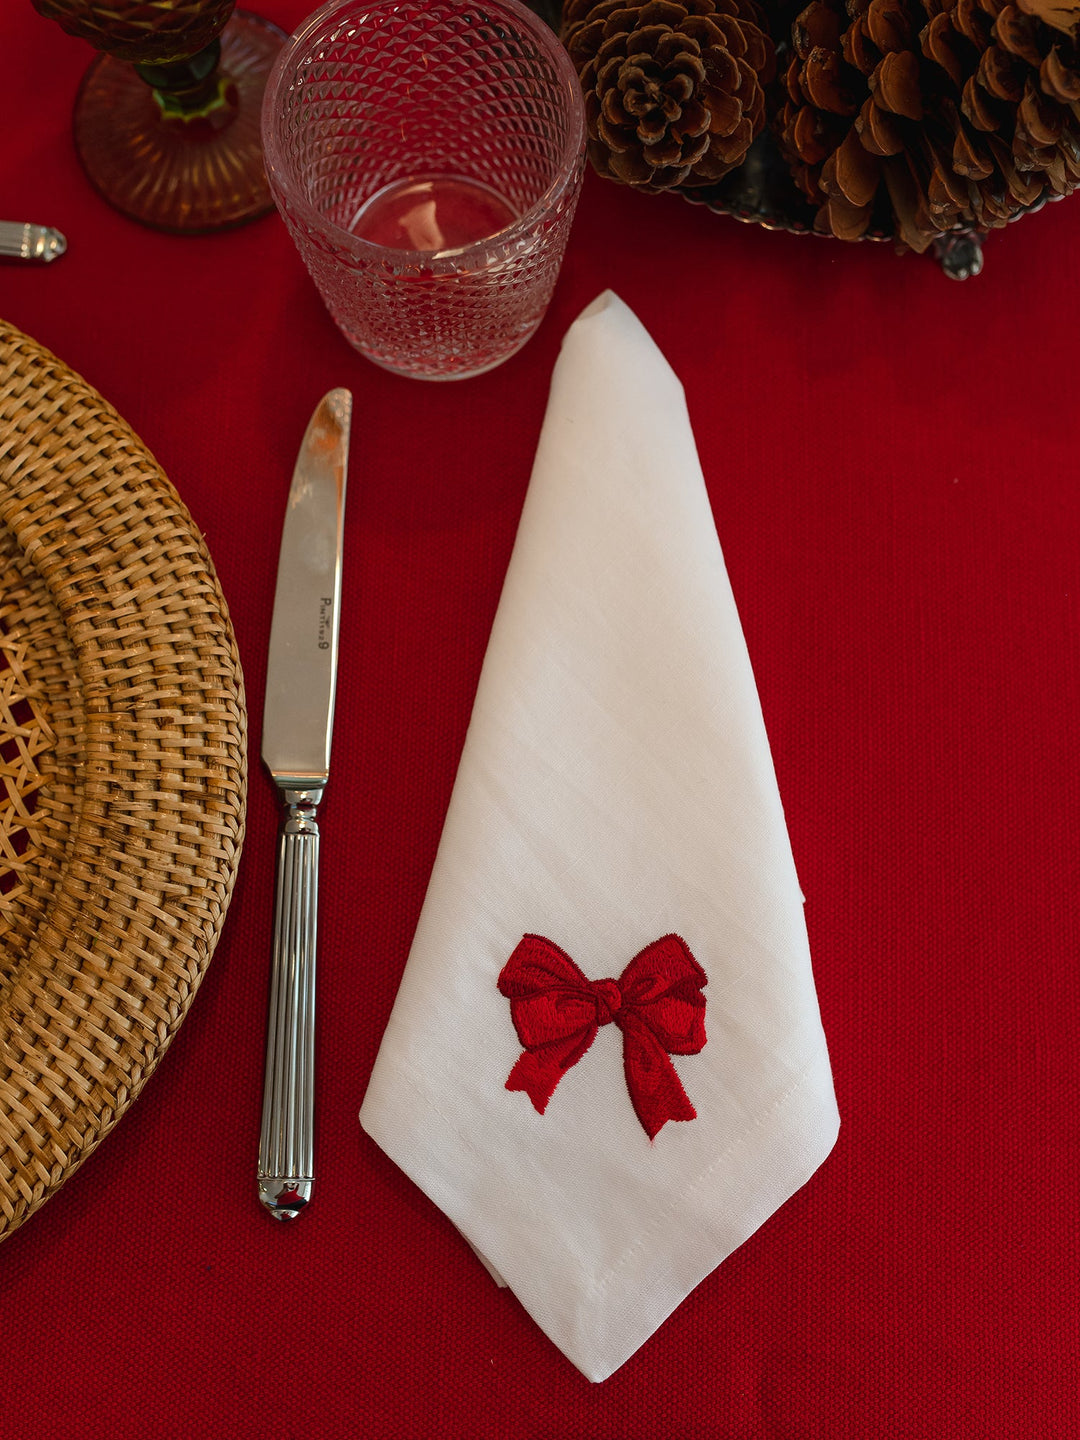 Red Bow Embroidered Linen Napkin